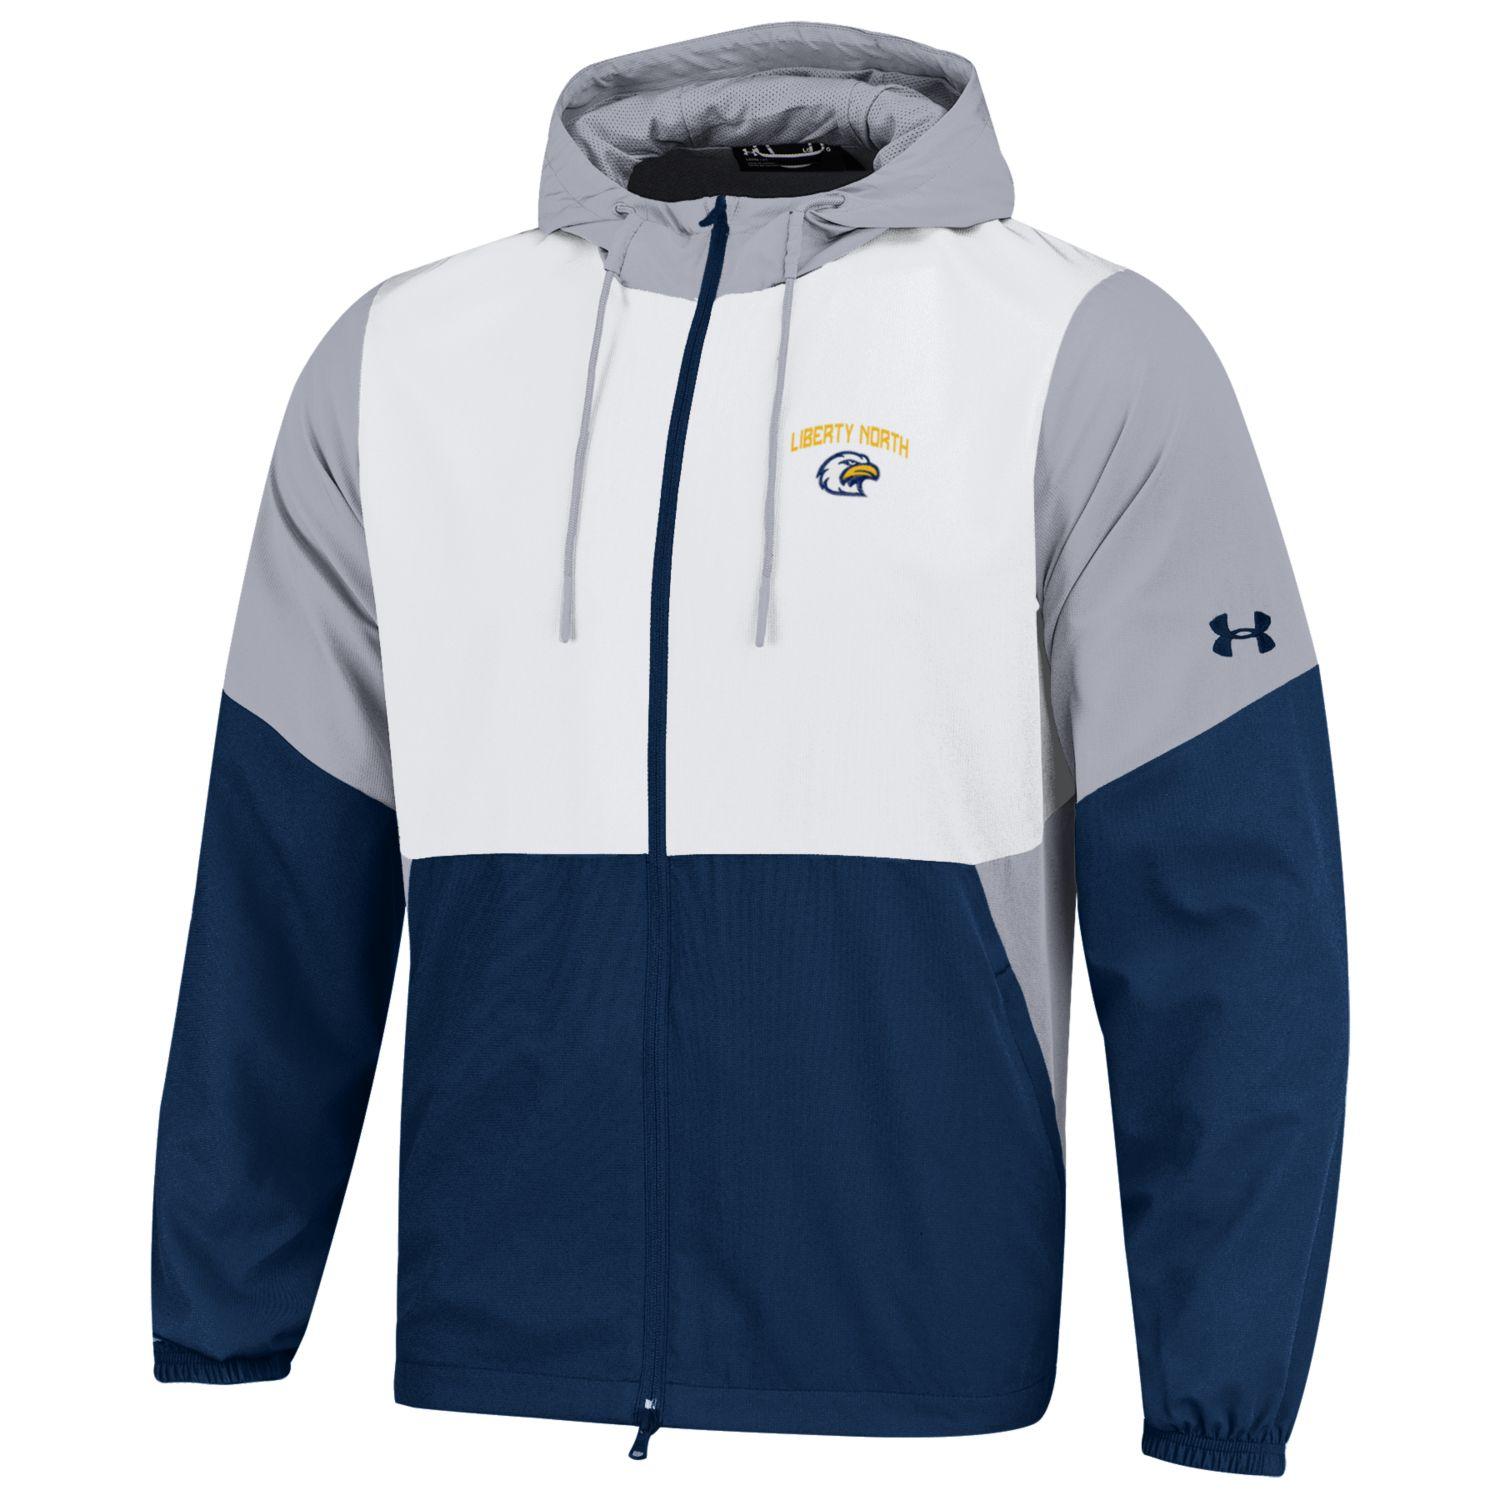 Liberty North Eagles FIELDHOUSE Full-Zip Jacket - Under Armour | MO ...